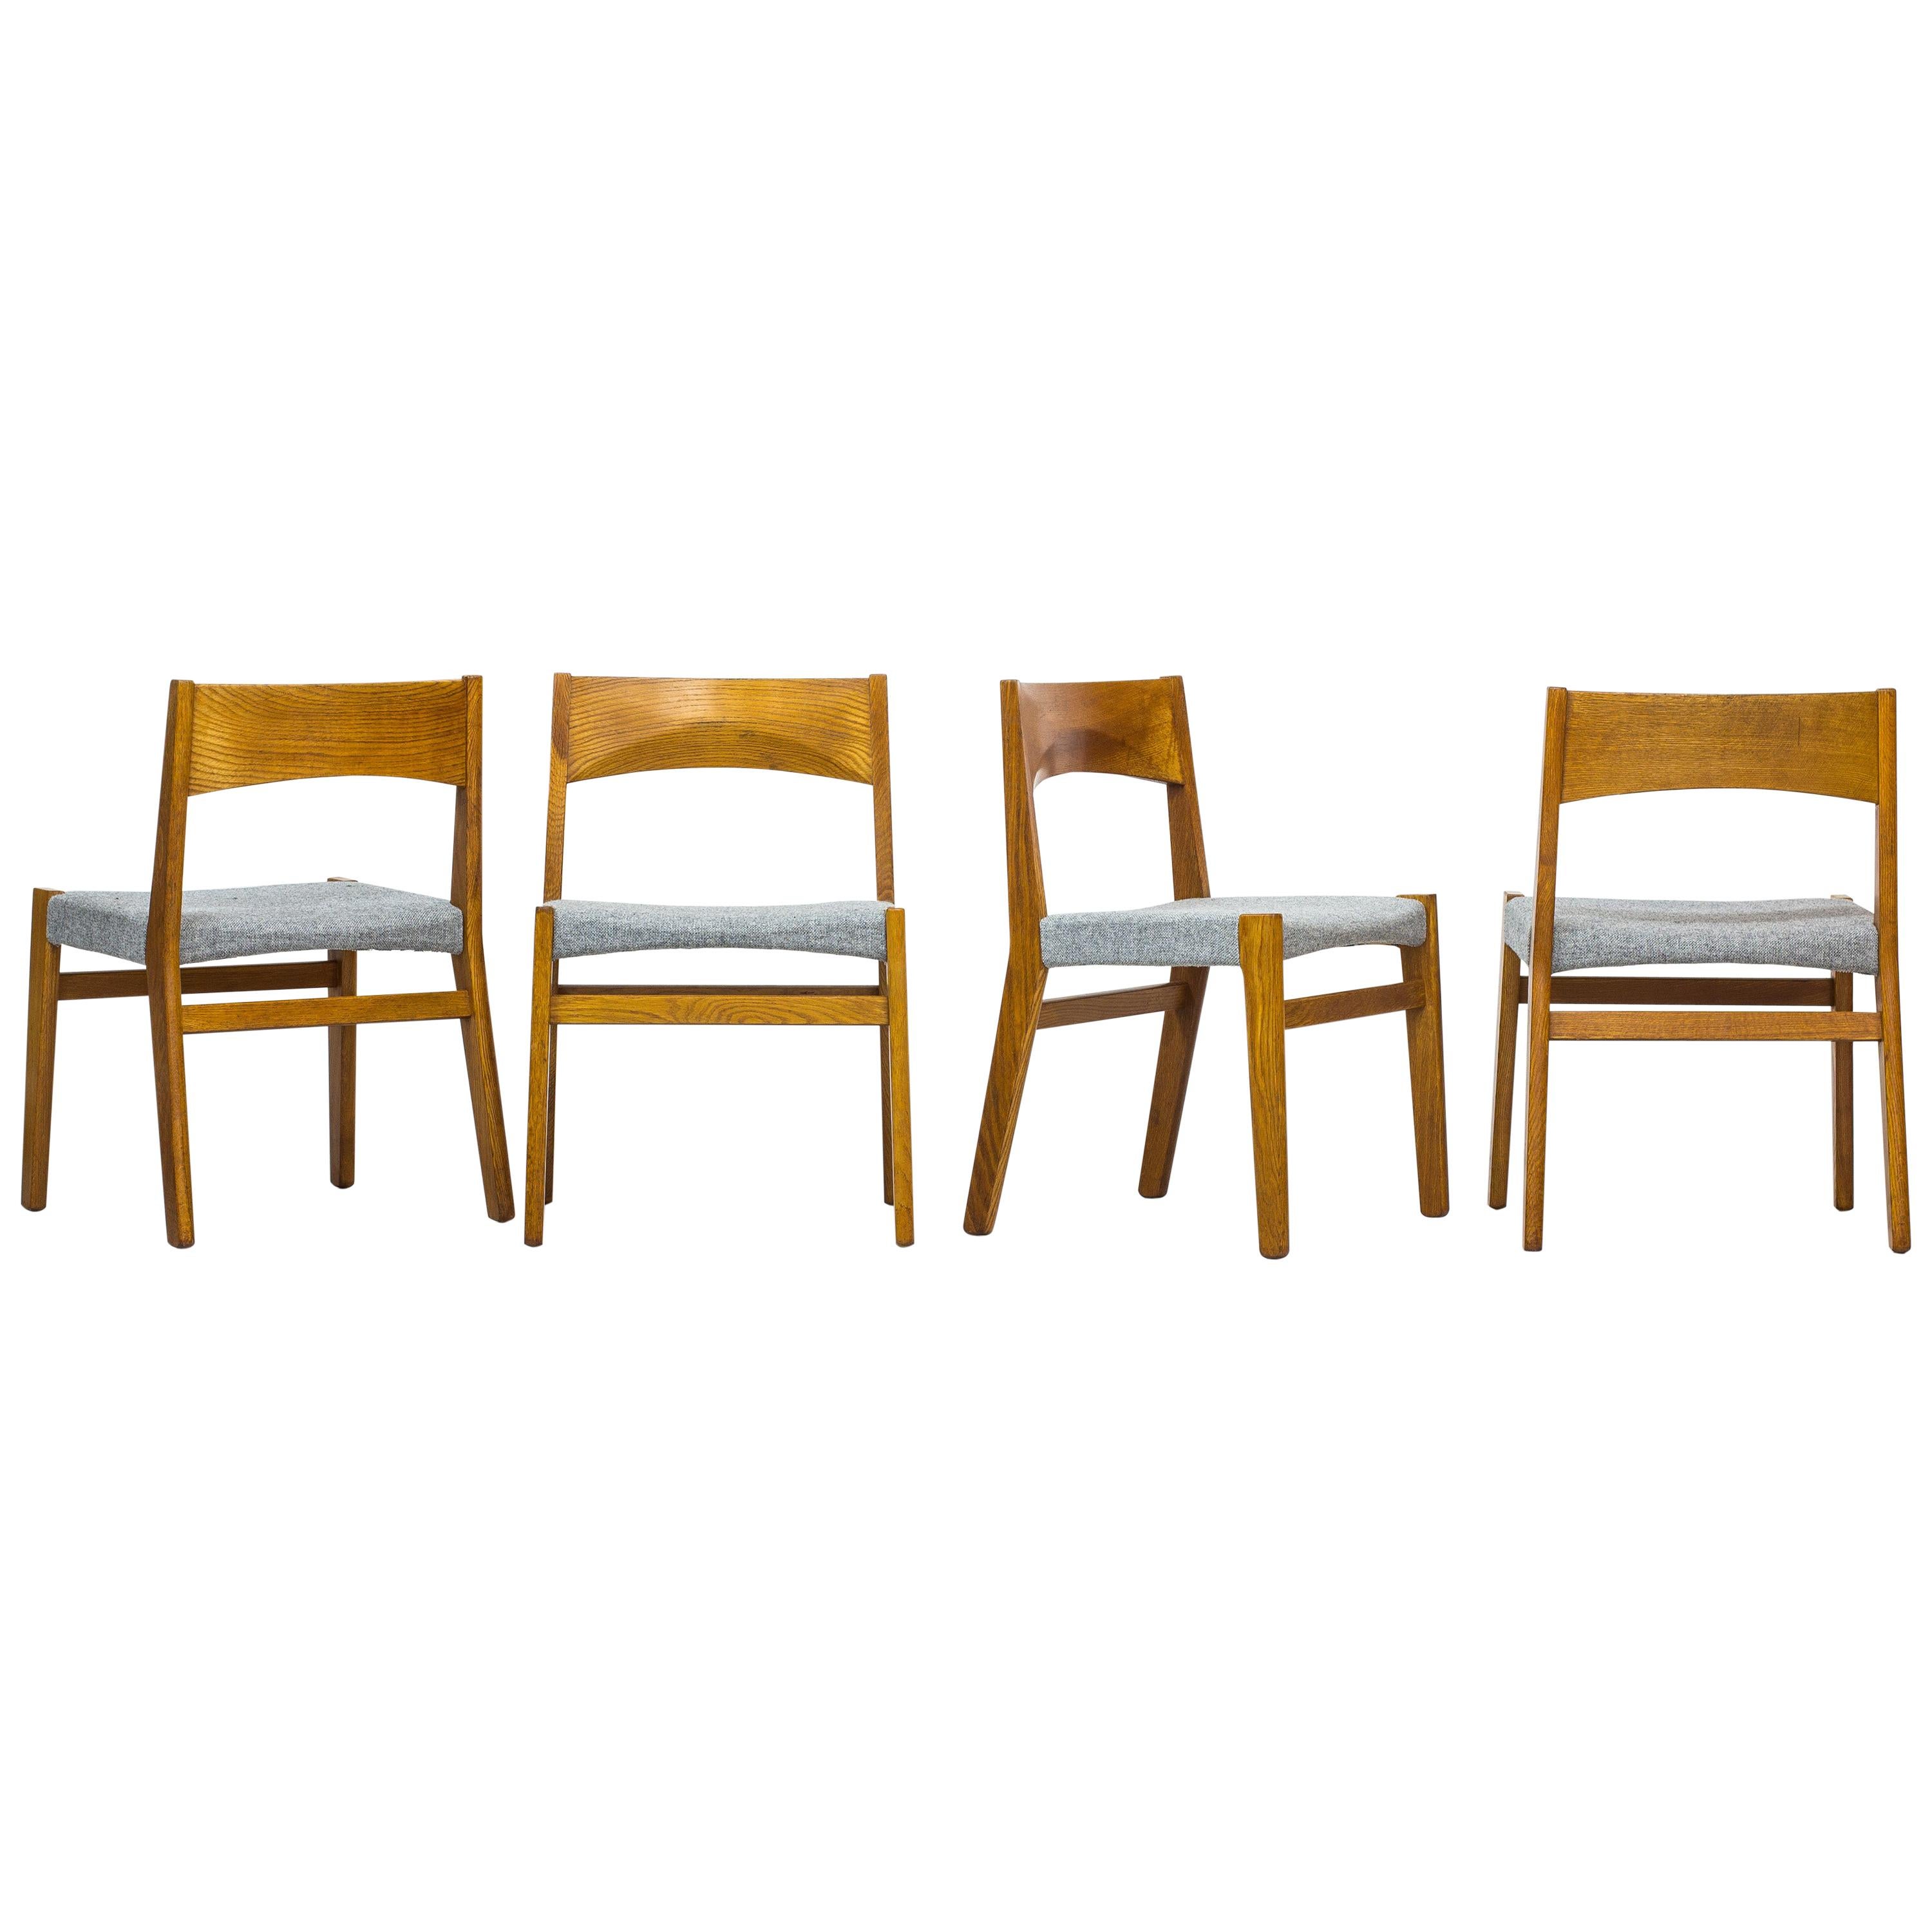 Dining chairs by John Vedel Rieper for Erhard Rasmussen, Denmark, circa 1957